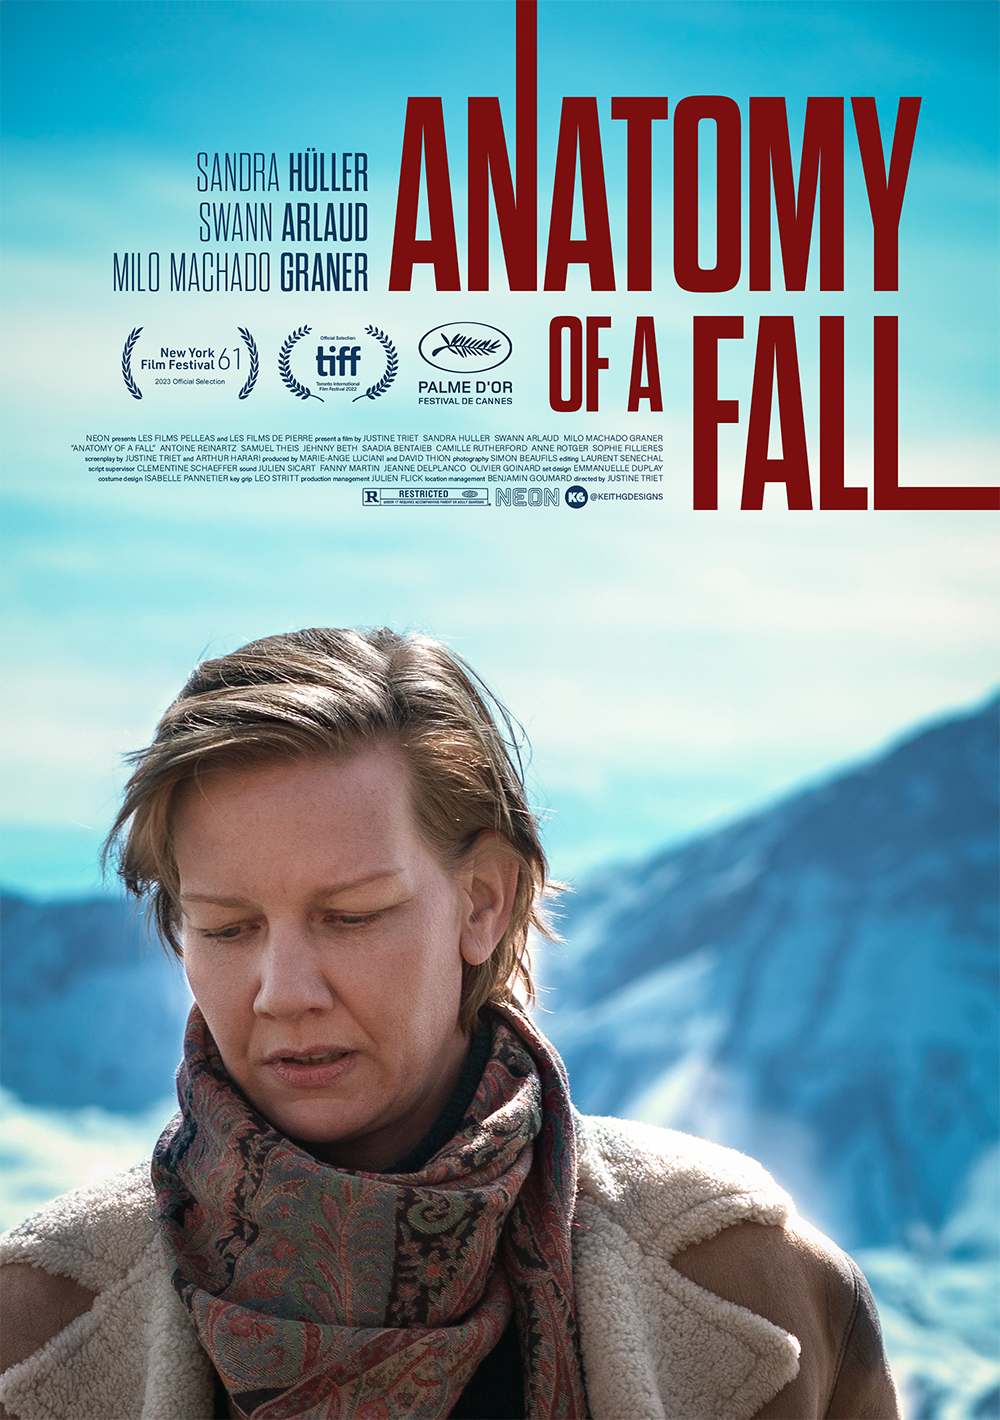 “Anatomy of a Fall” by Marie-Ange Luciani and David Thion, Producers